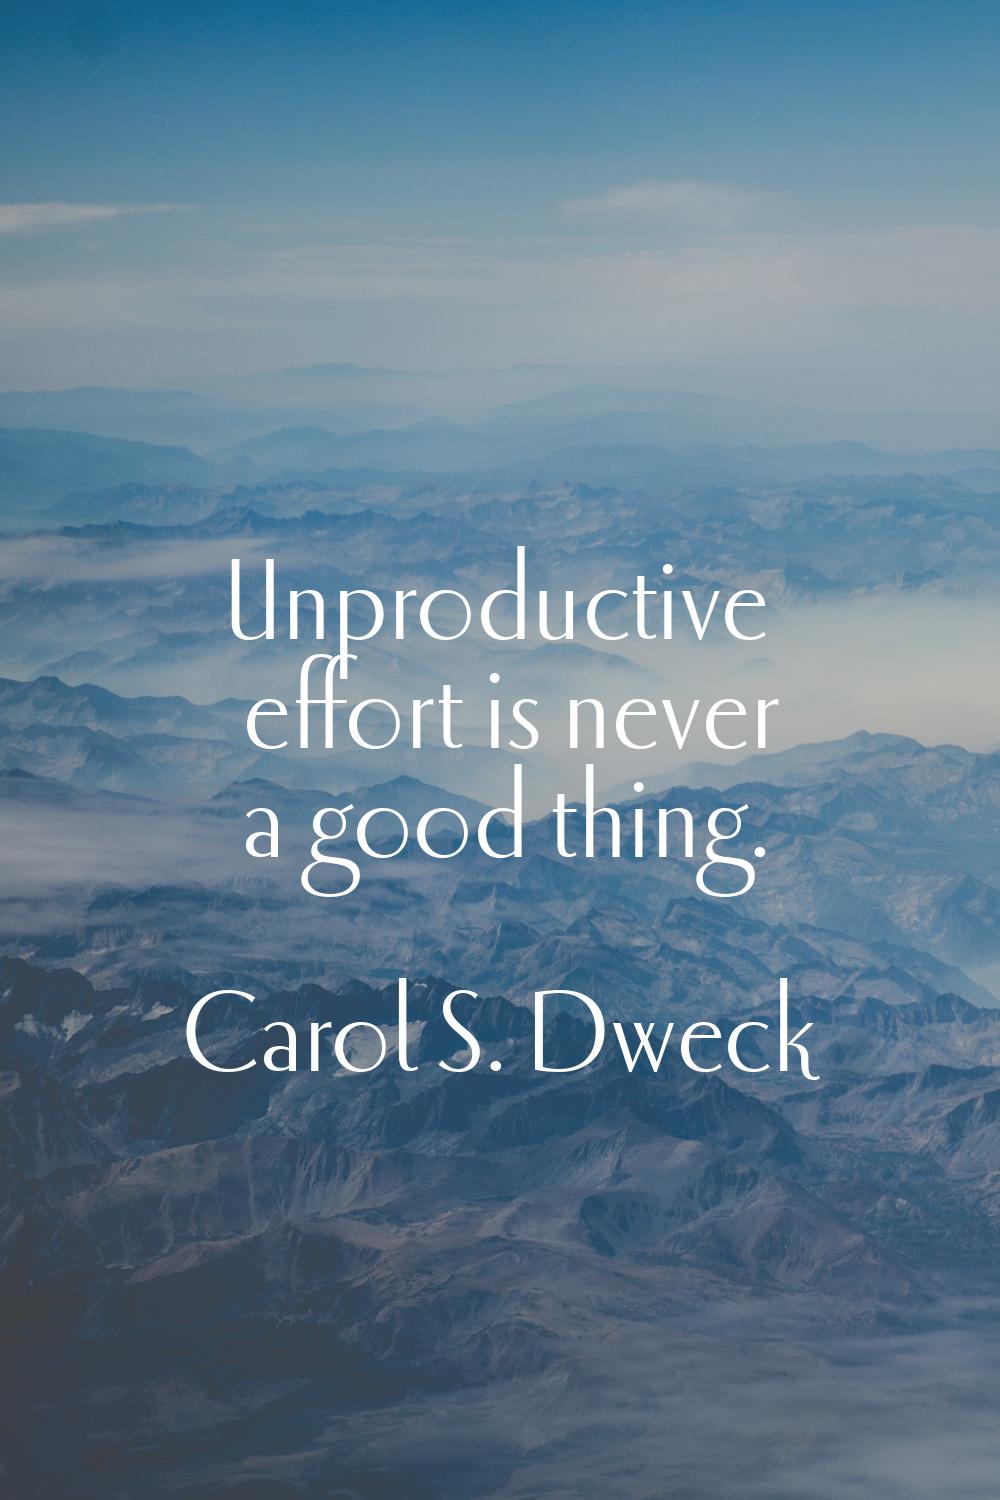 Unproductive effort is never a good thing.